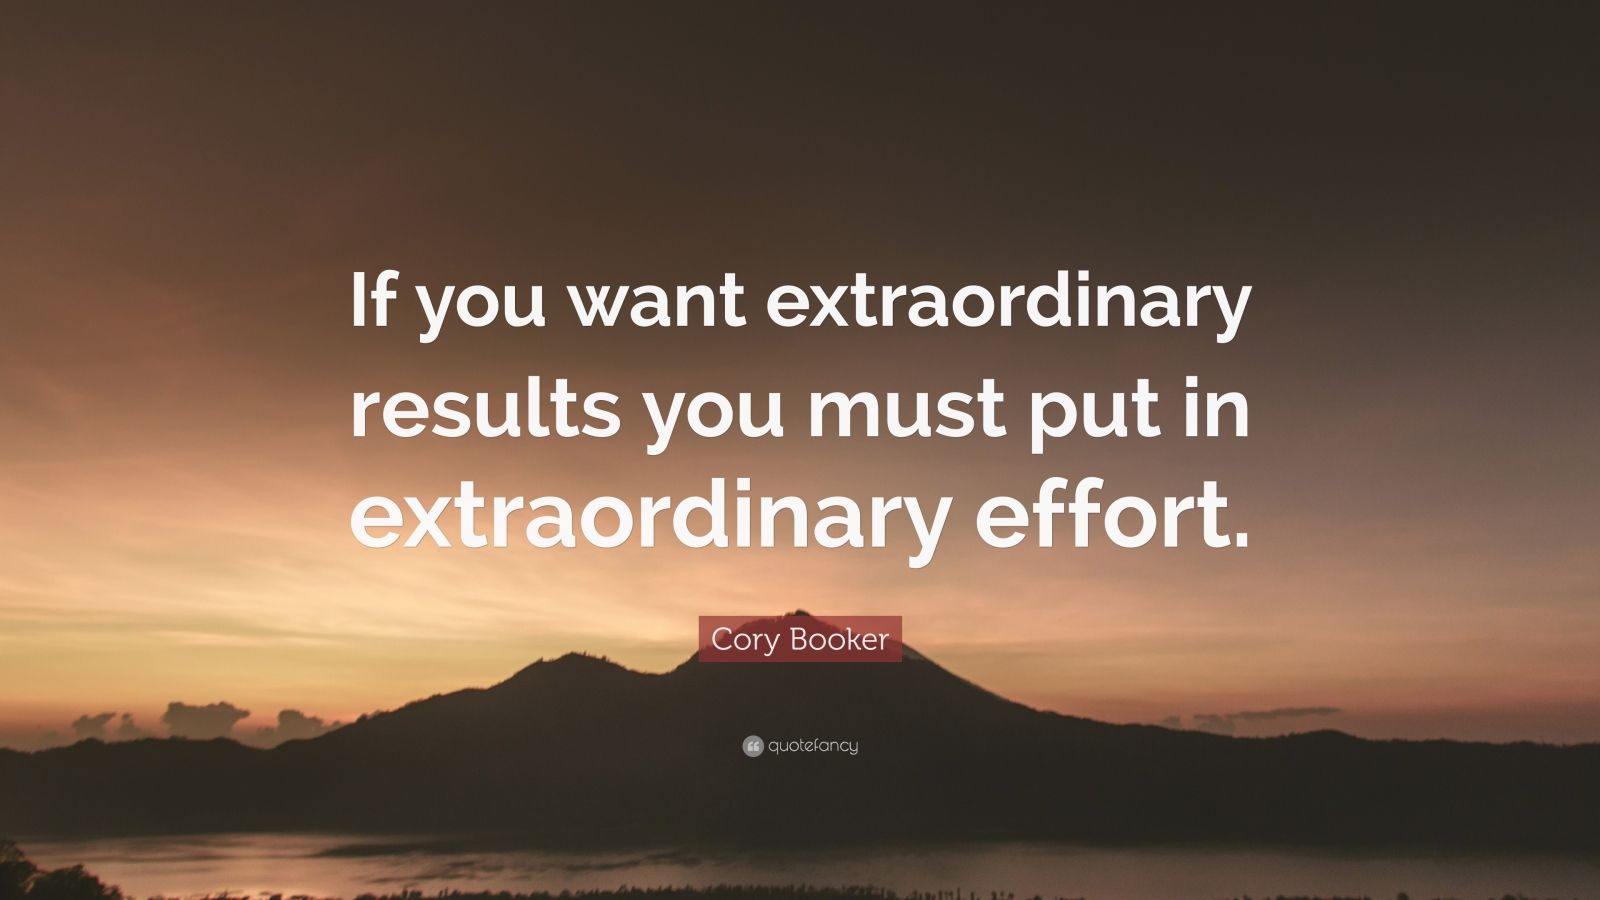 Cory Booker Quote: “If you want extraordinary results you must put in